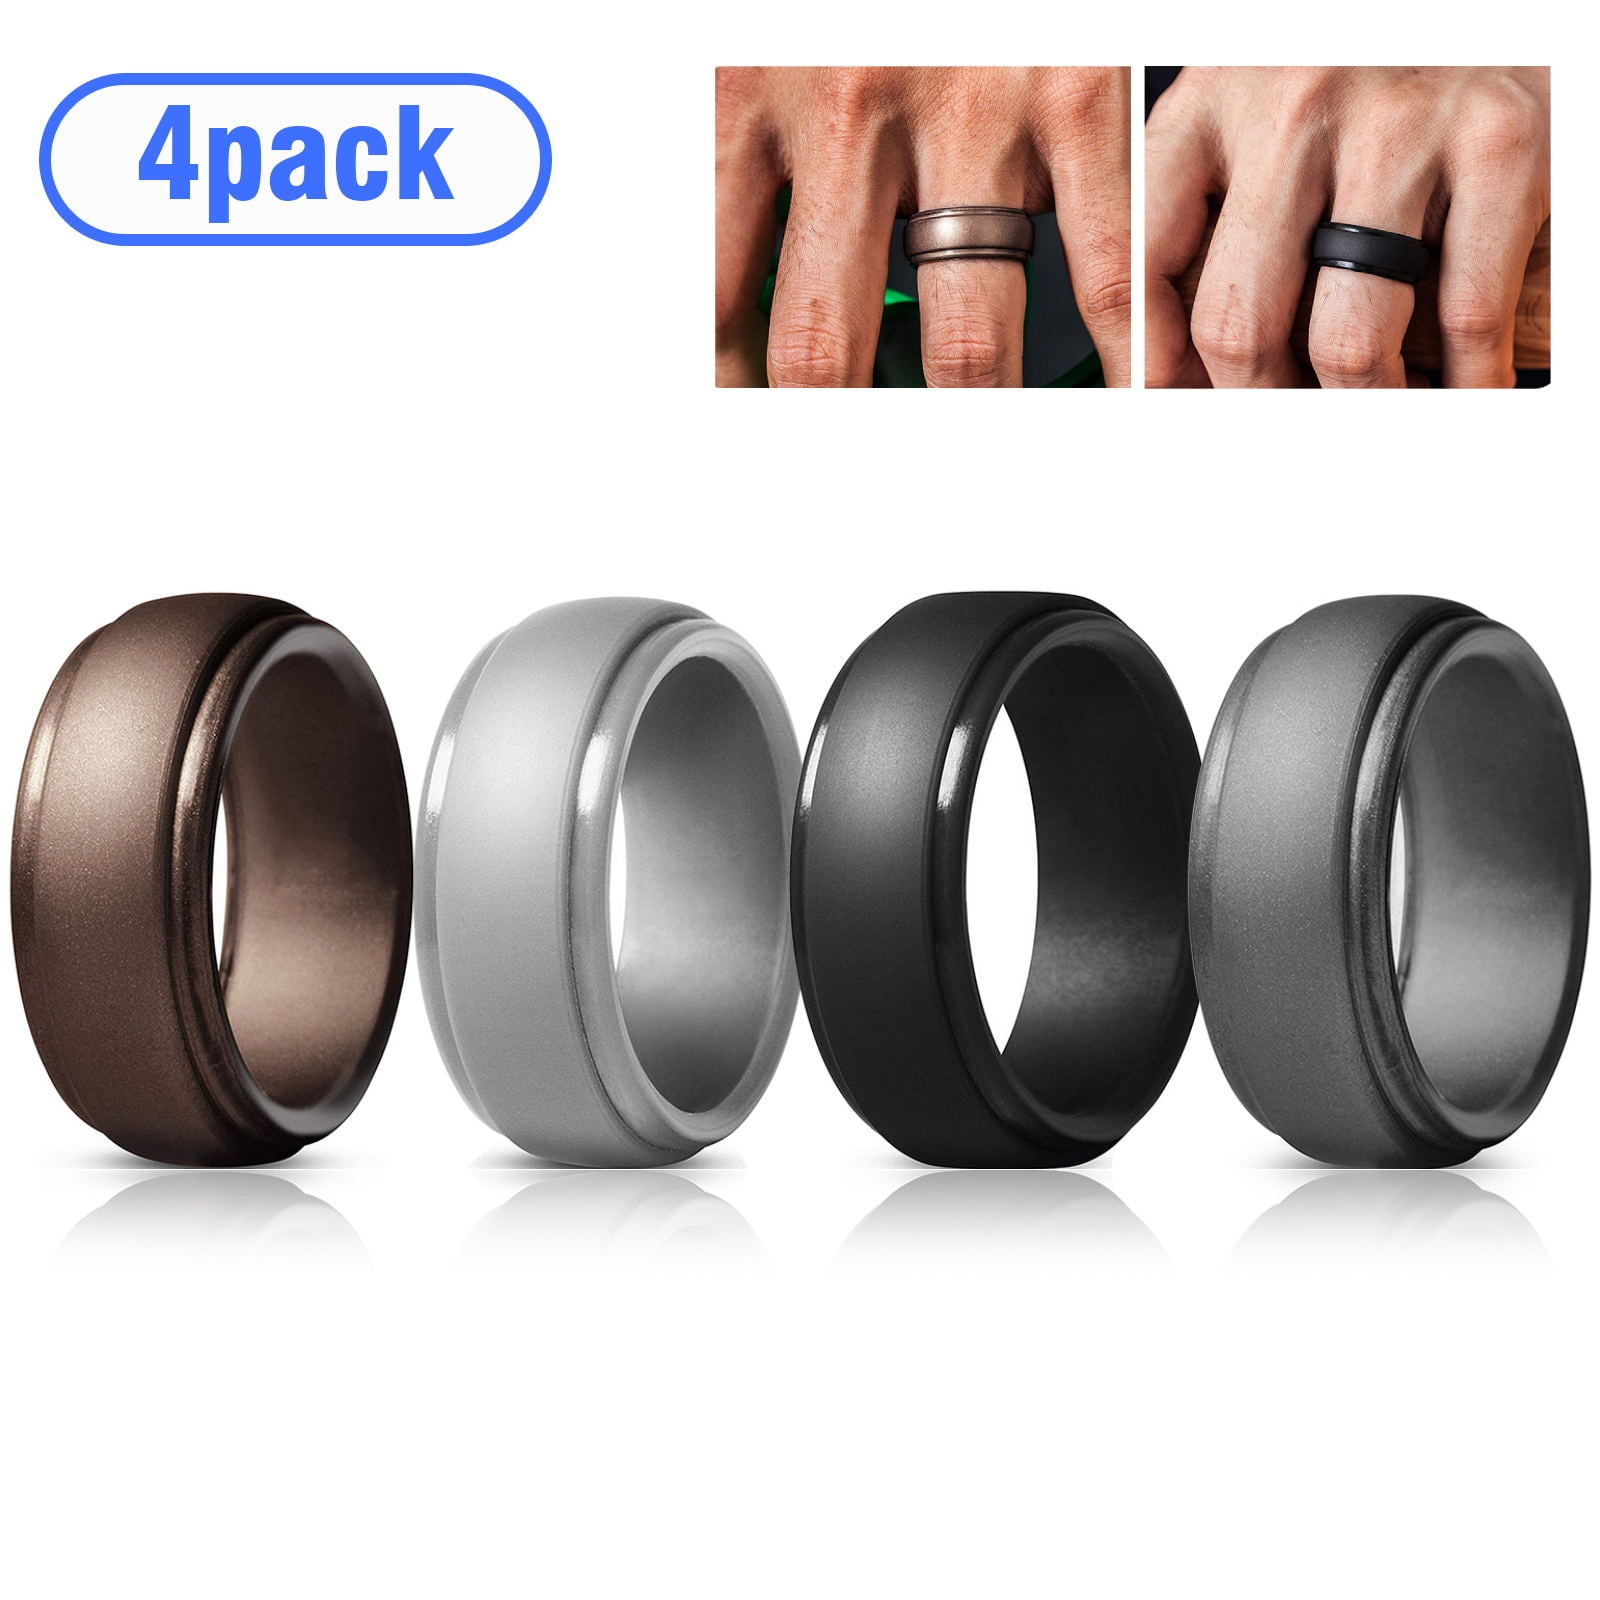 2.5 mm Thick Workout Arua Breathable Silicone Wedding Rings for Men Crossfit 8 mm Wide 4-Pack/ Rubber Wedding Bands for Ahtletes 